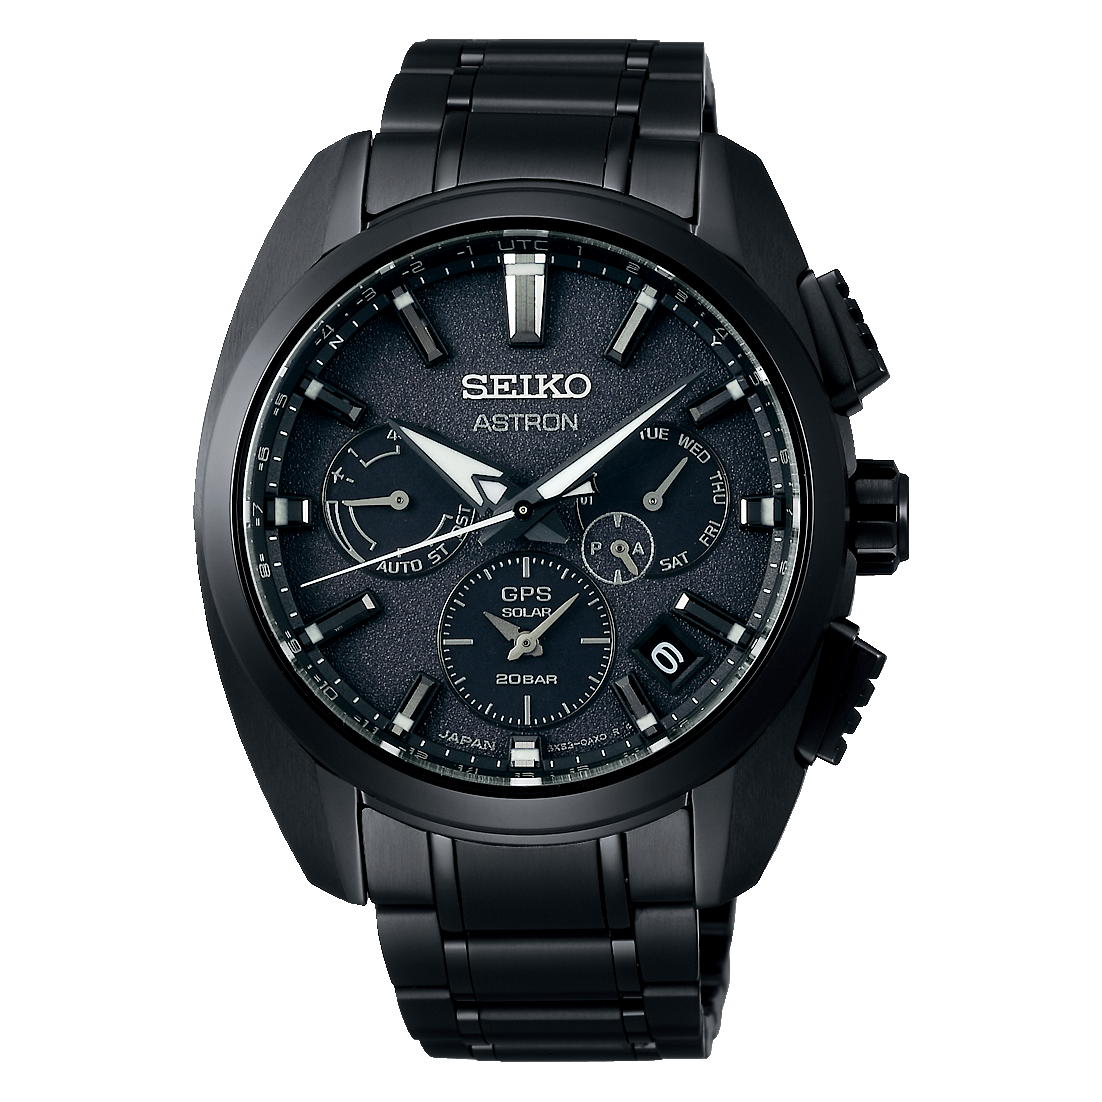 Astron GPS Solar | Seiko Boutique | The Official UK Online Store